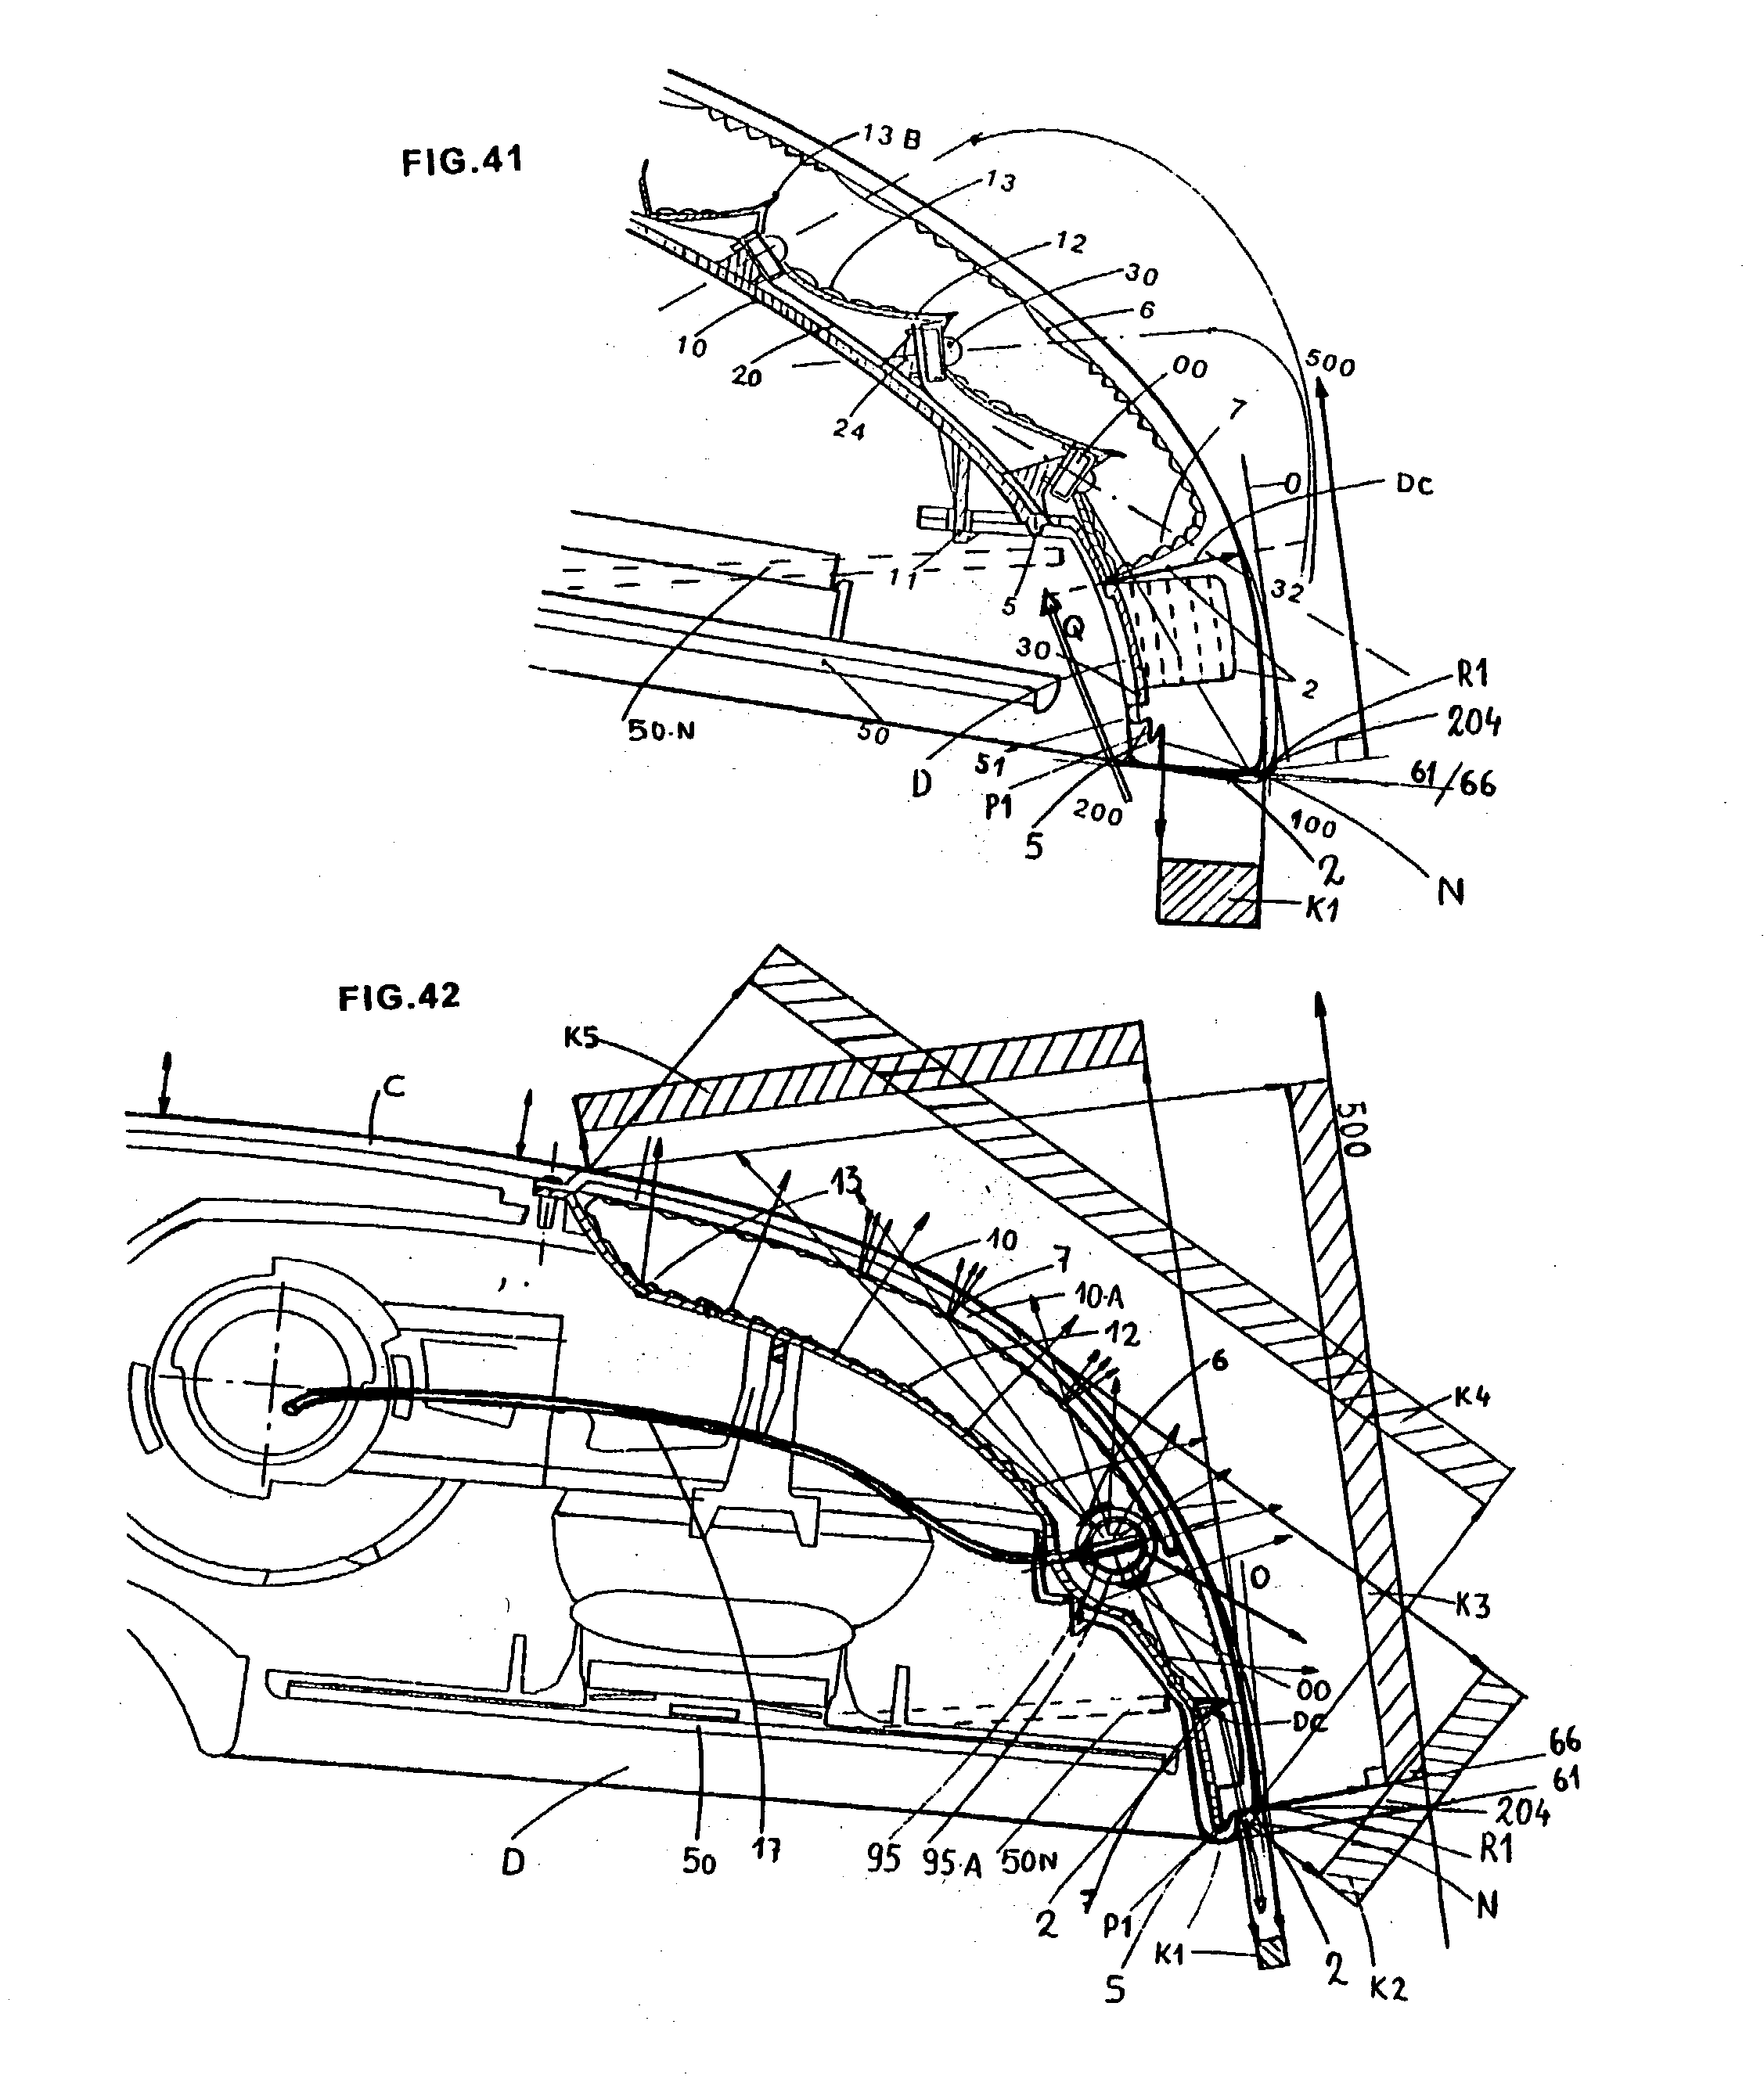 Youtube 2001 Buick Lesabre Engine Wiring Harness from diagramweb.net